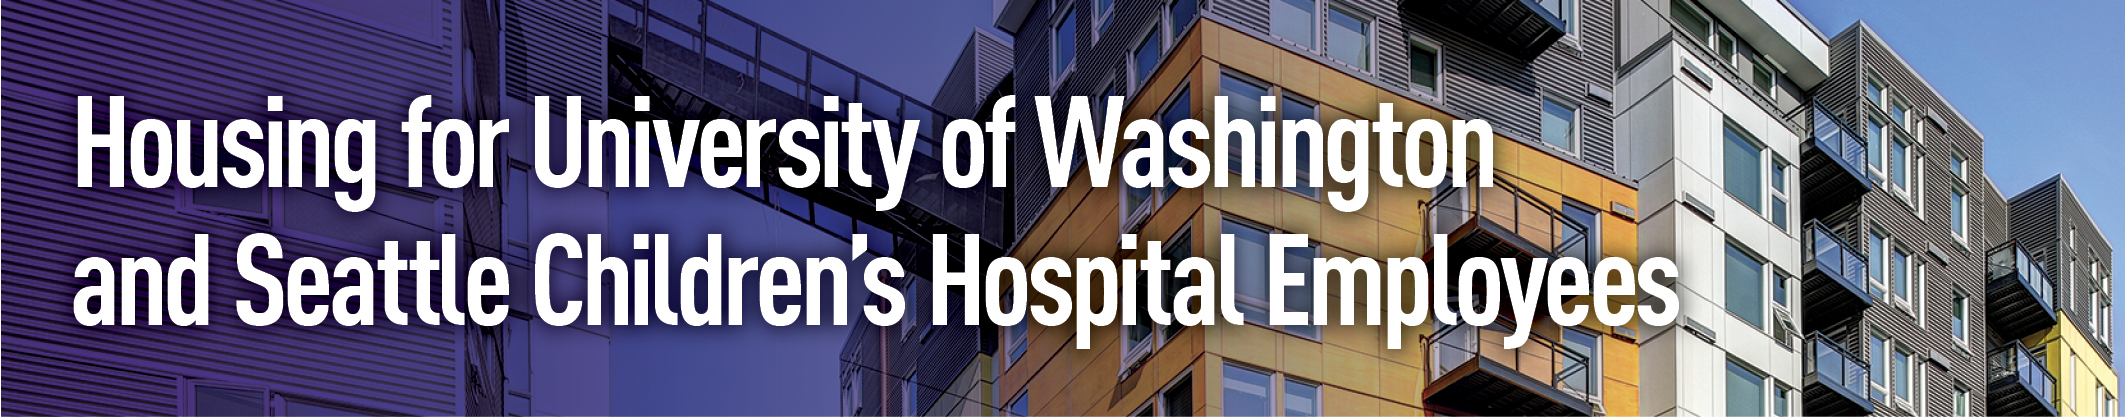 Housing for UW and Seattle Children's Hospital Employees